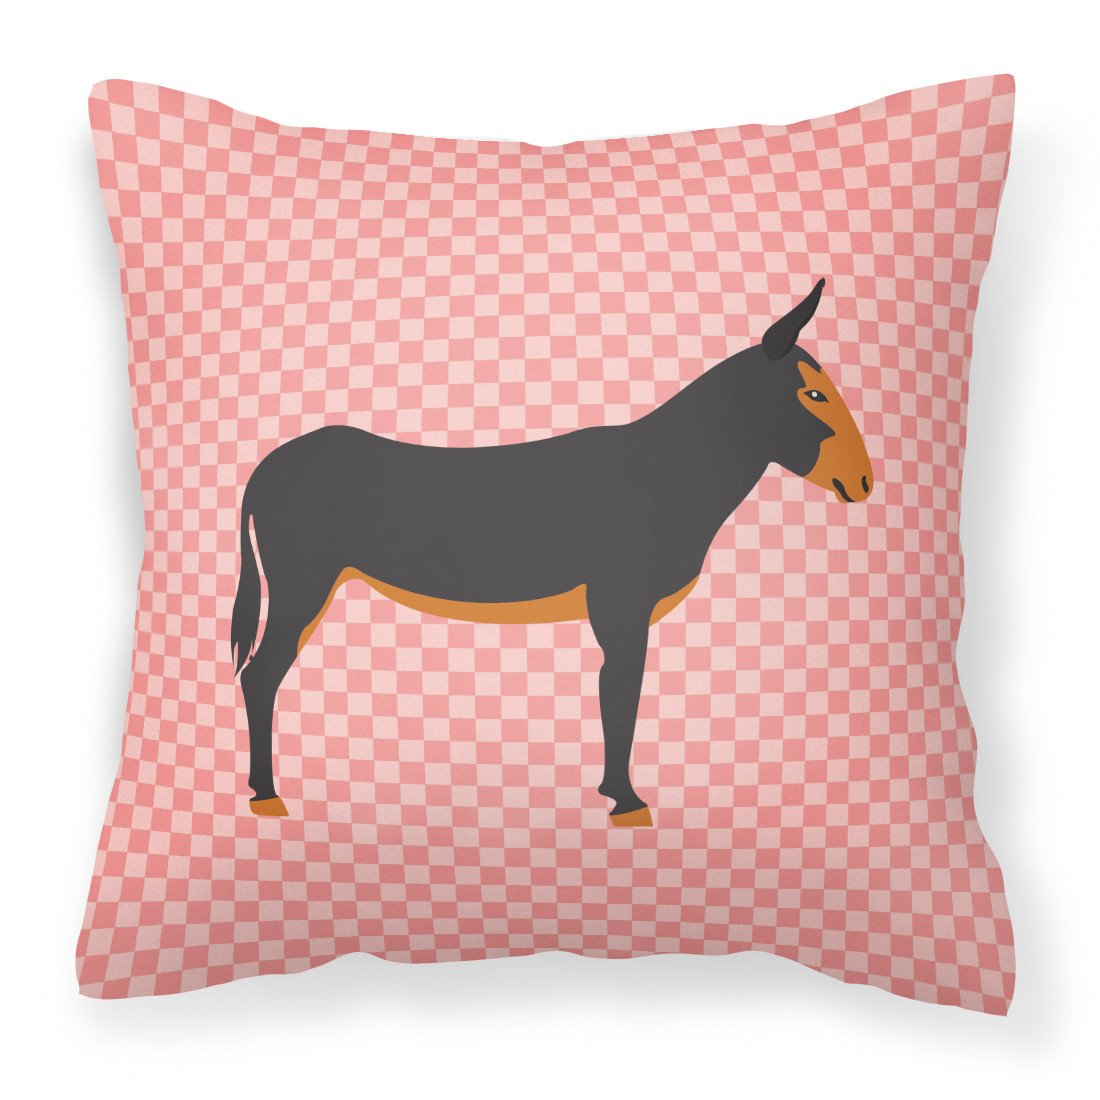 Catalan Donkey Pink Check Fabric Decorative Pillow BB7855PW1818 by Caroline's Treasures